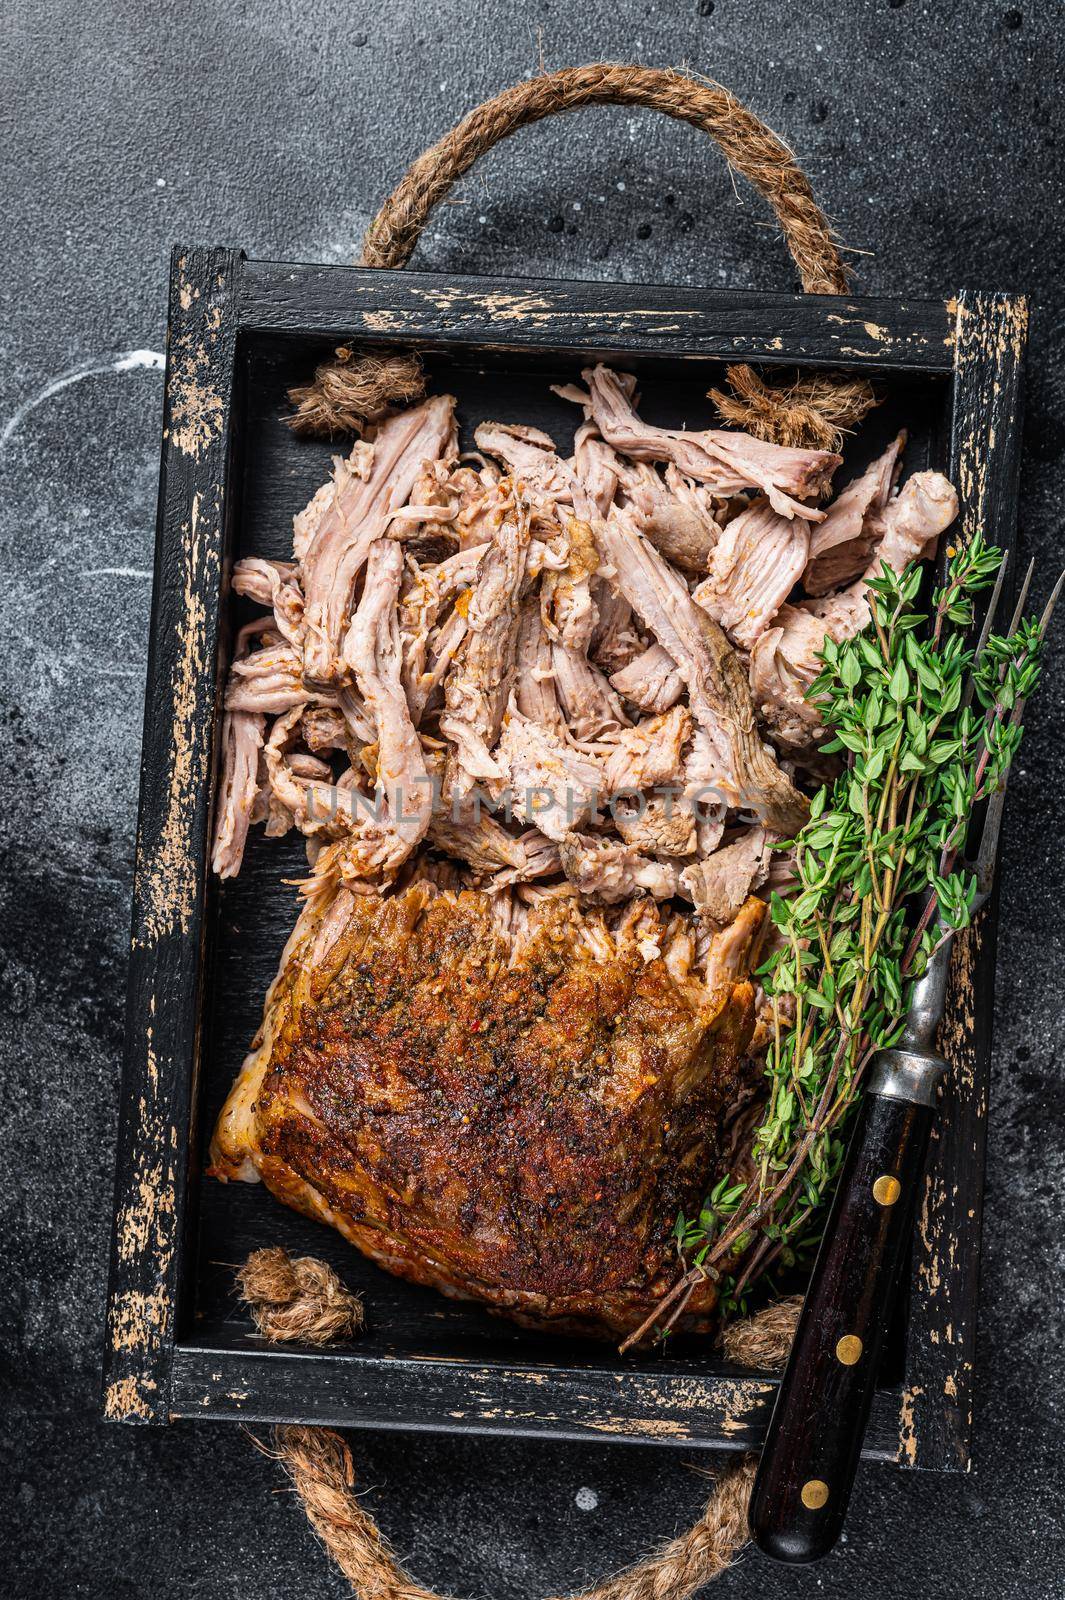 Bbq slow roast puilled pork meat in a wooden tray. Black background. Top view by Composter